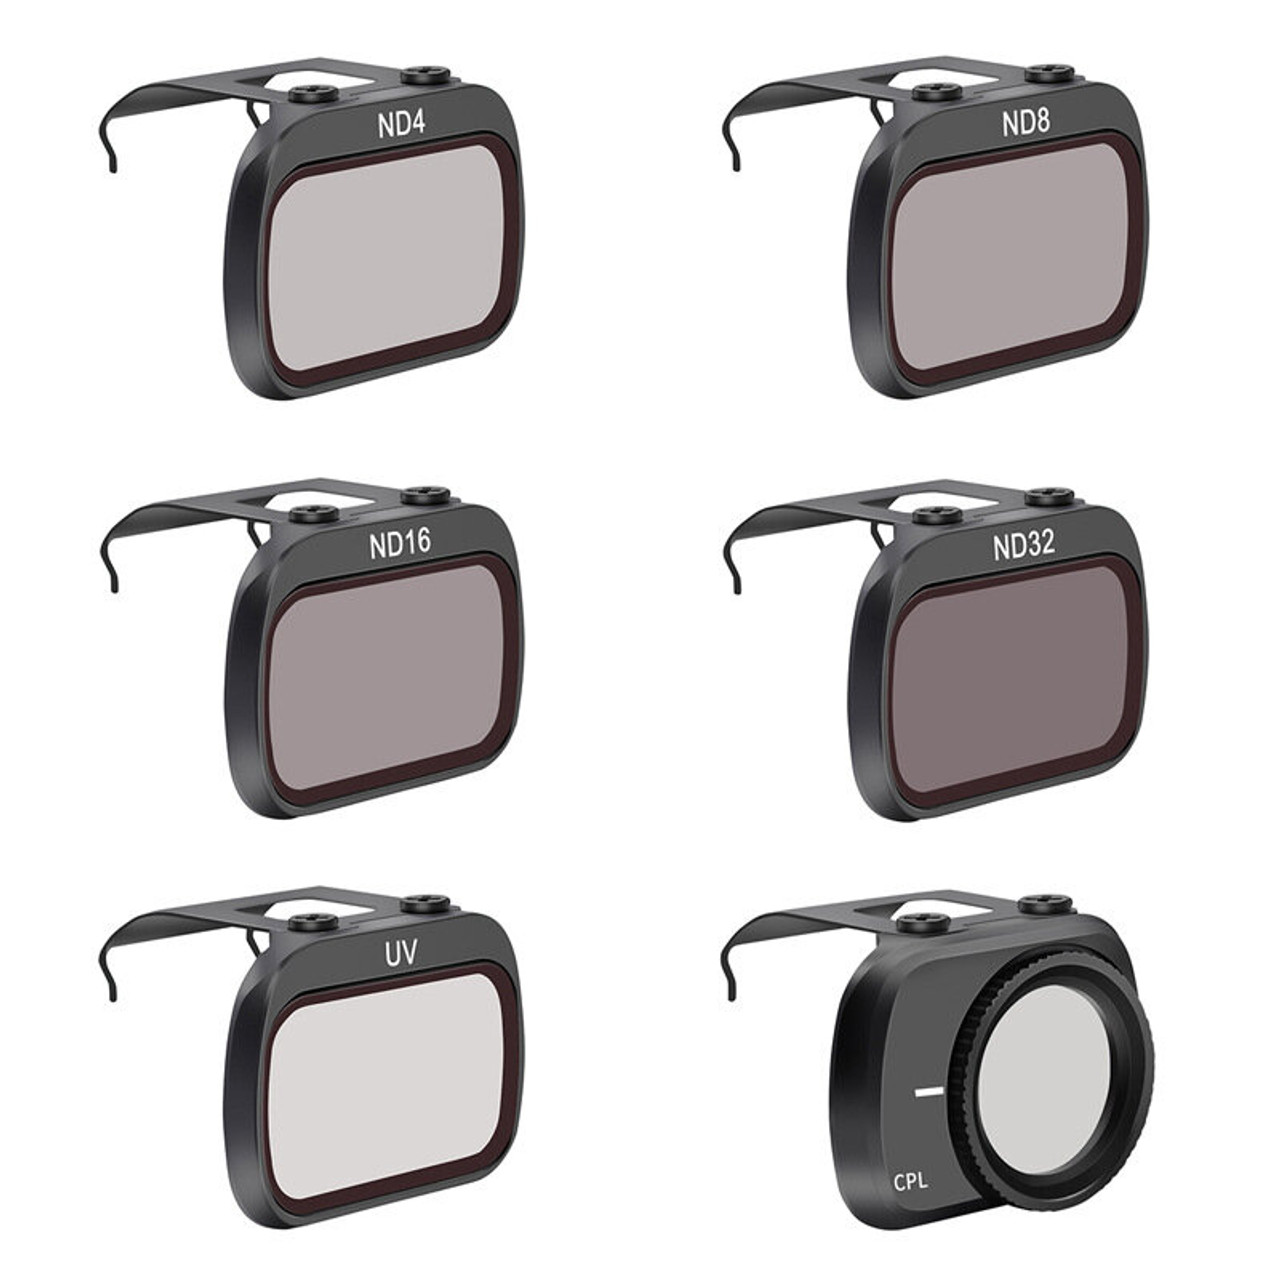 Supfoto ND Filters Set for DJI Mini 2 Drone Adjustable UV Filter ND4,ND8,ND16,ND32,MCUV,CPL Filter 6 Pack